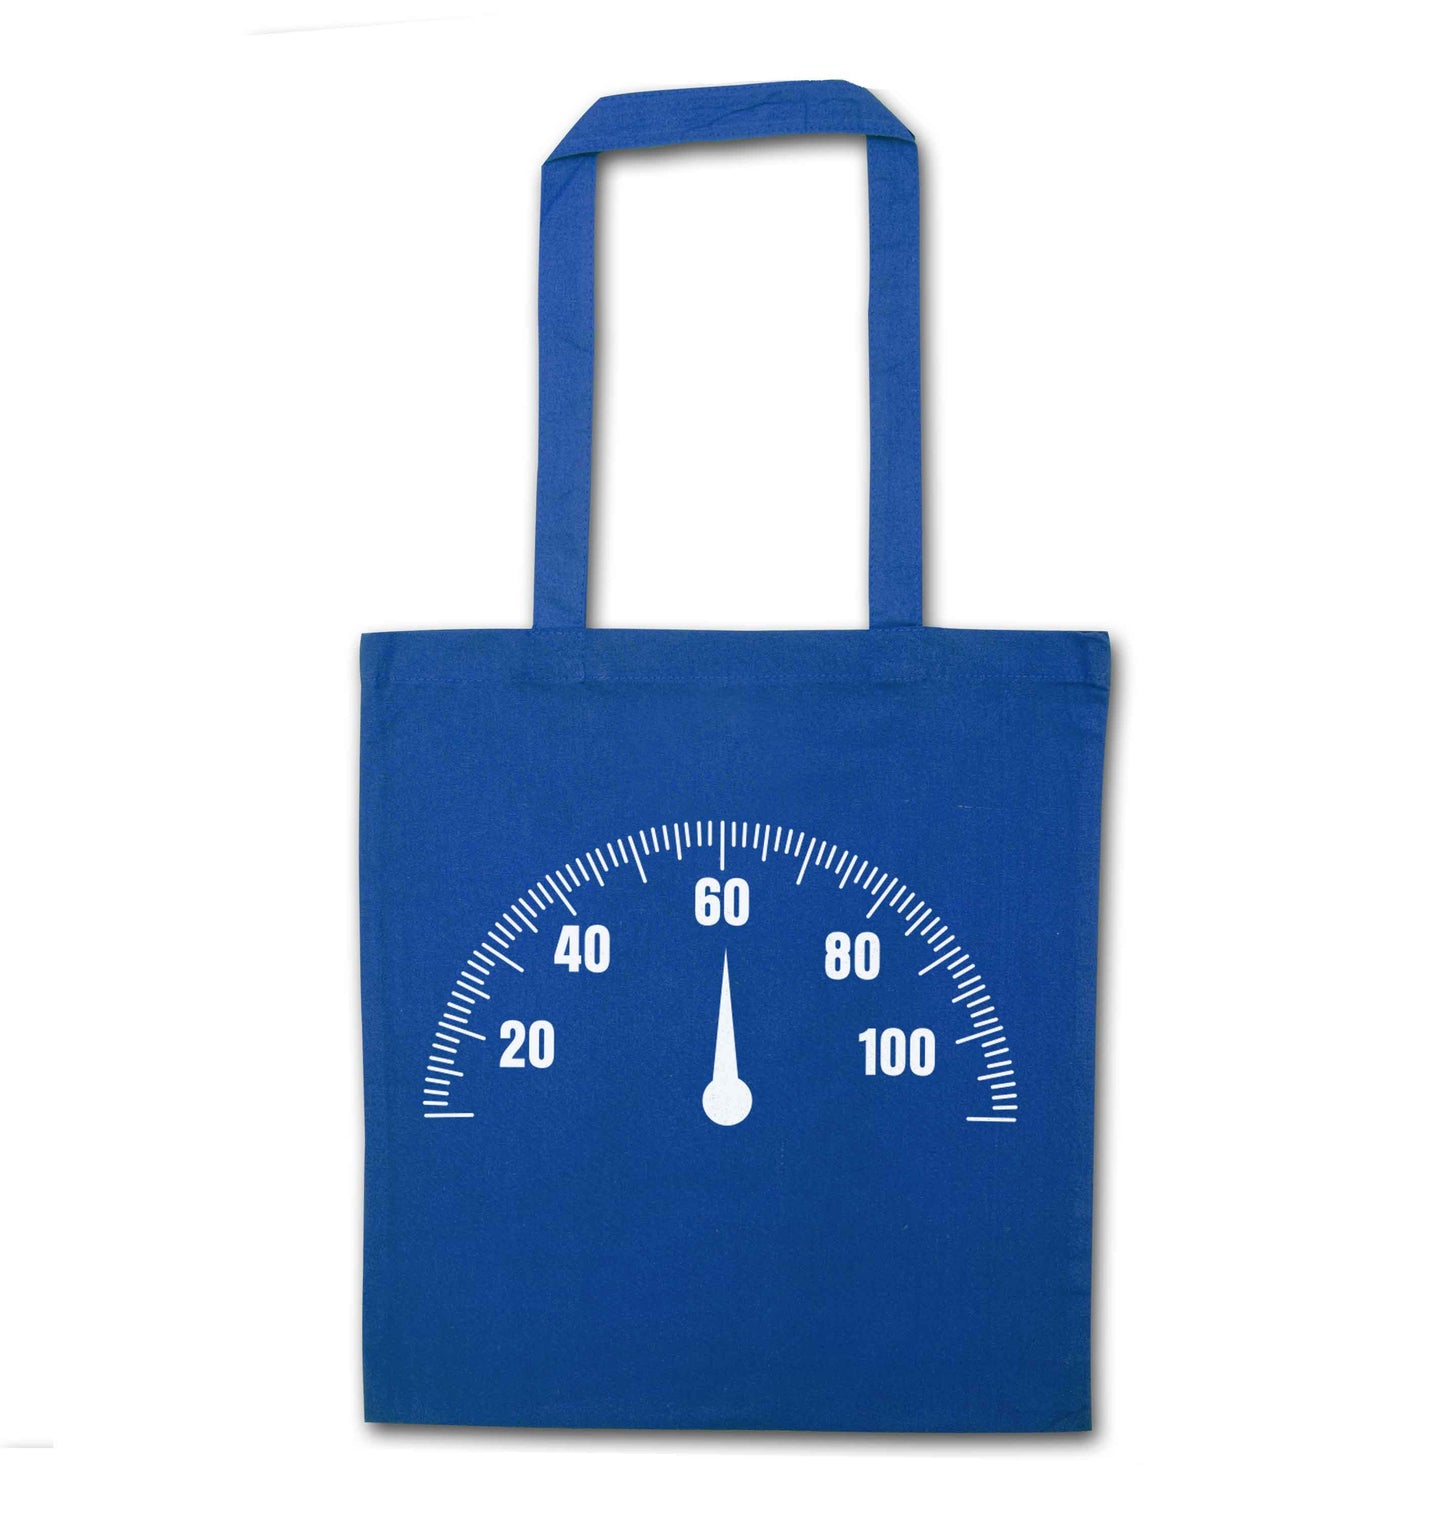 Speed dial 60 blue tote bag